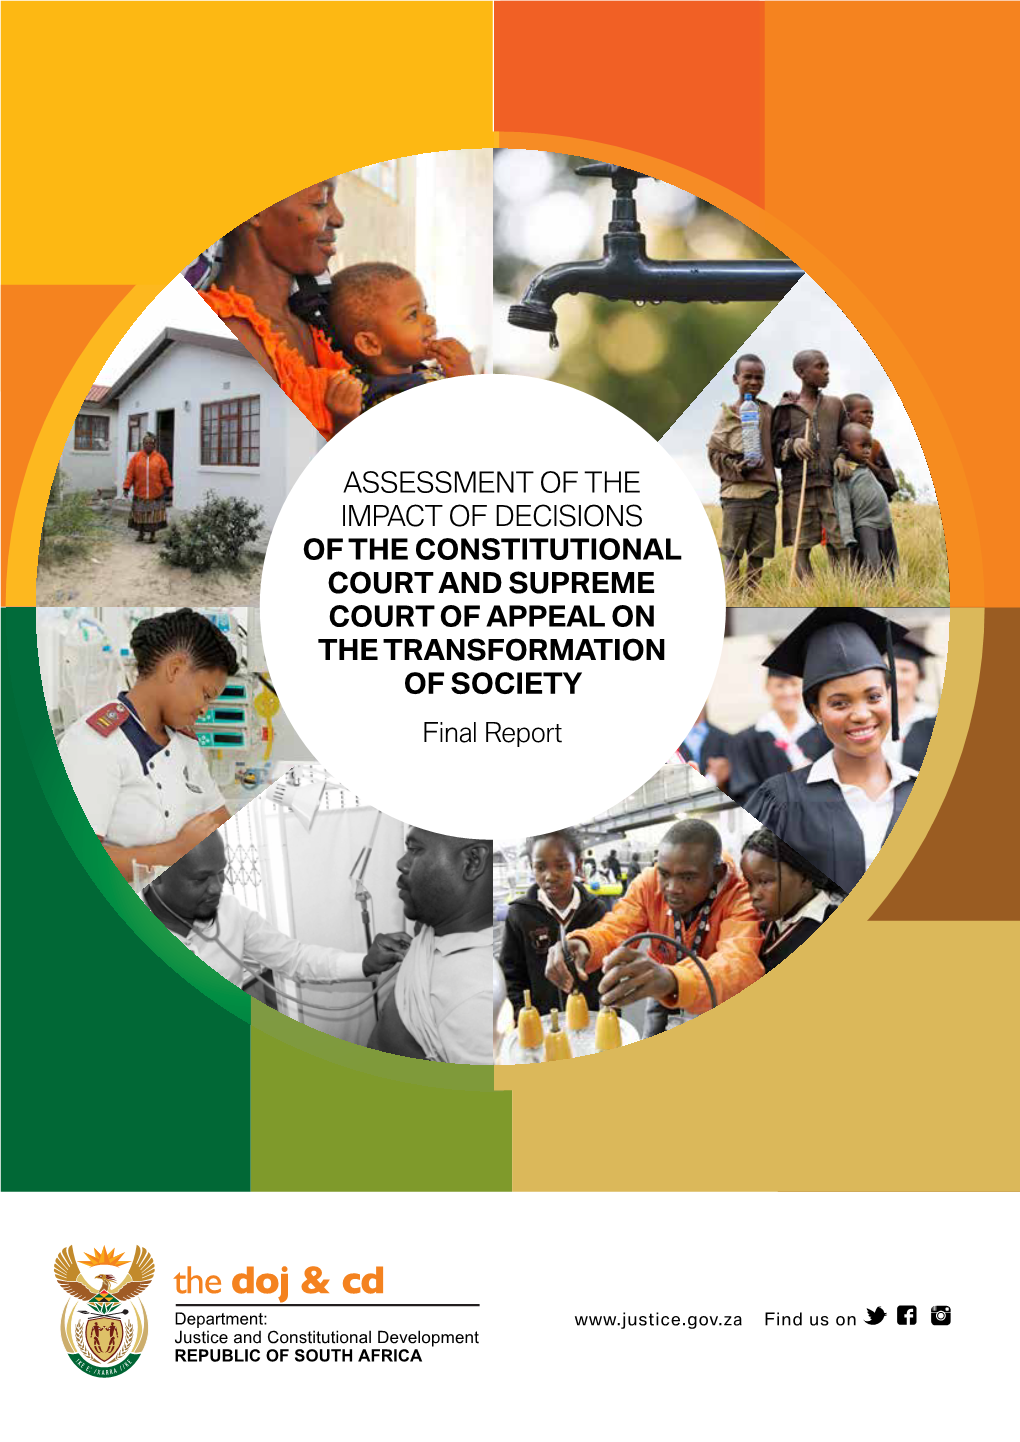 Assessment of the Impact of Decisions of the Constitutional Court and Supreme Court of Appeal on the Transformation of Society